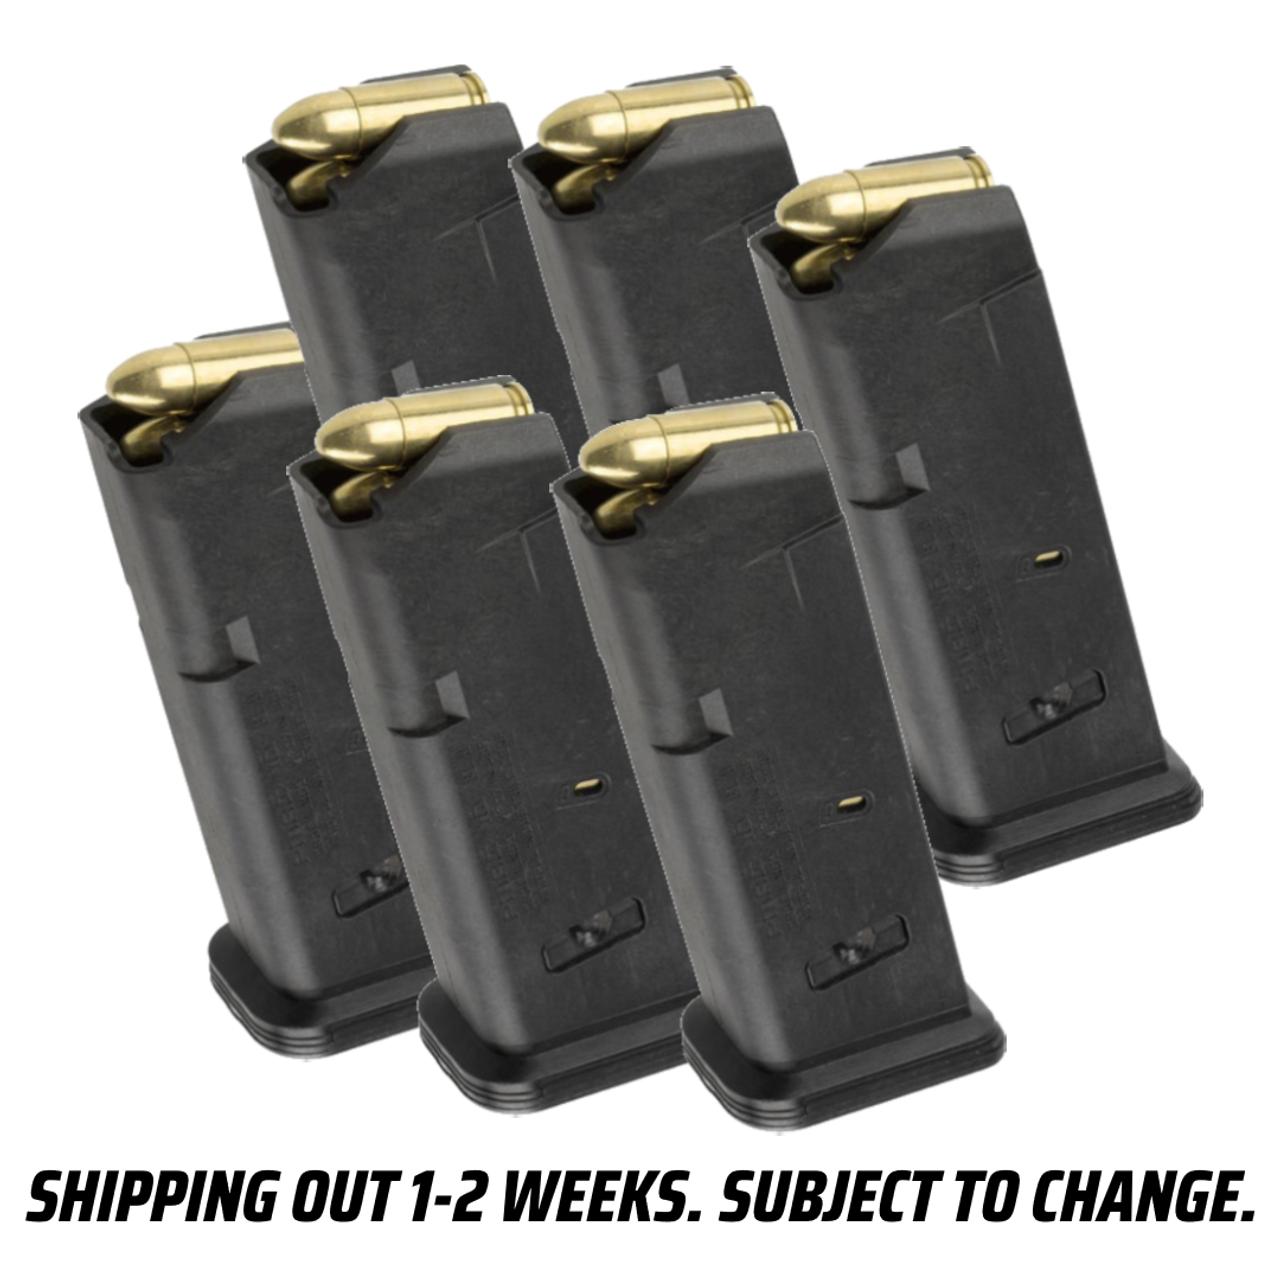 *6-PACK* Magpul MAG907 PMAG 10 GL9 9mm Magazines for Glock G19